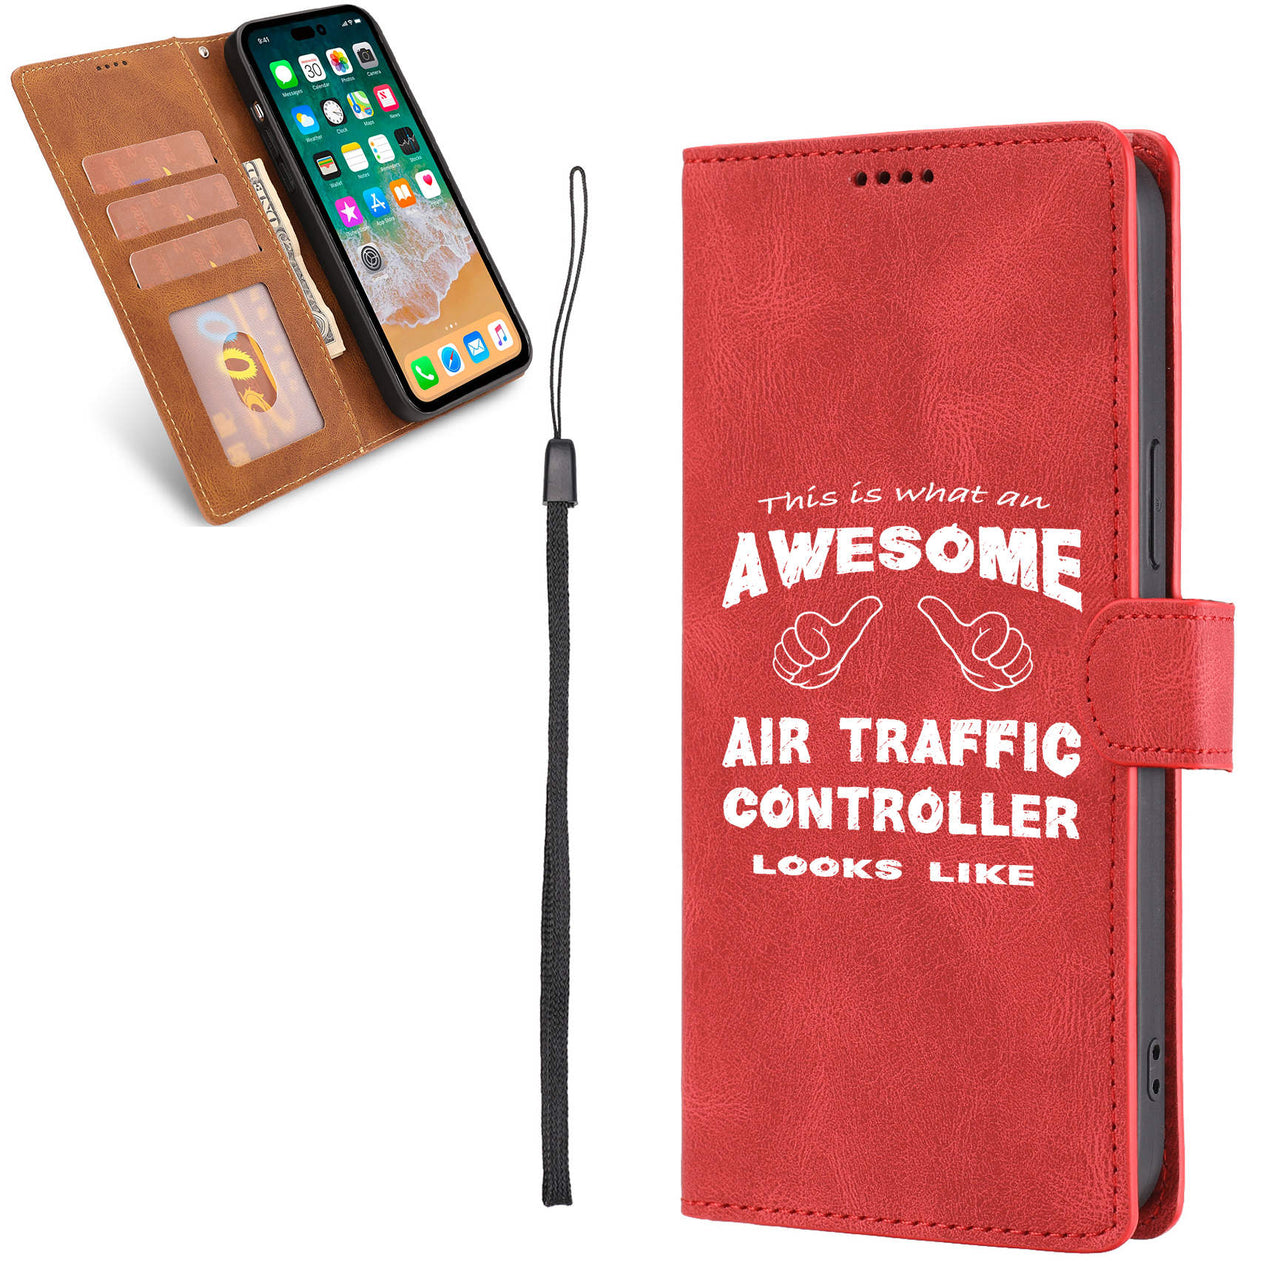 Air Traffic Controller Designed Leather iPhone Cases